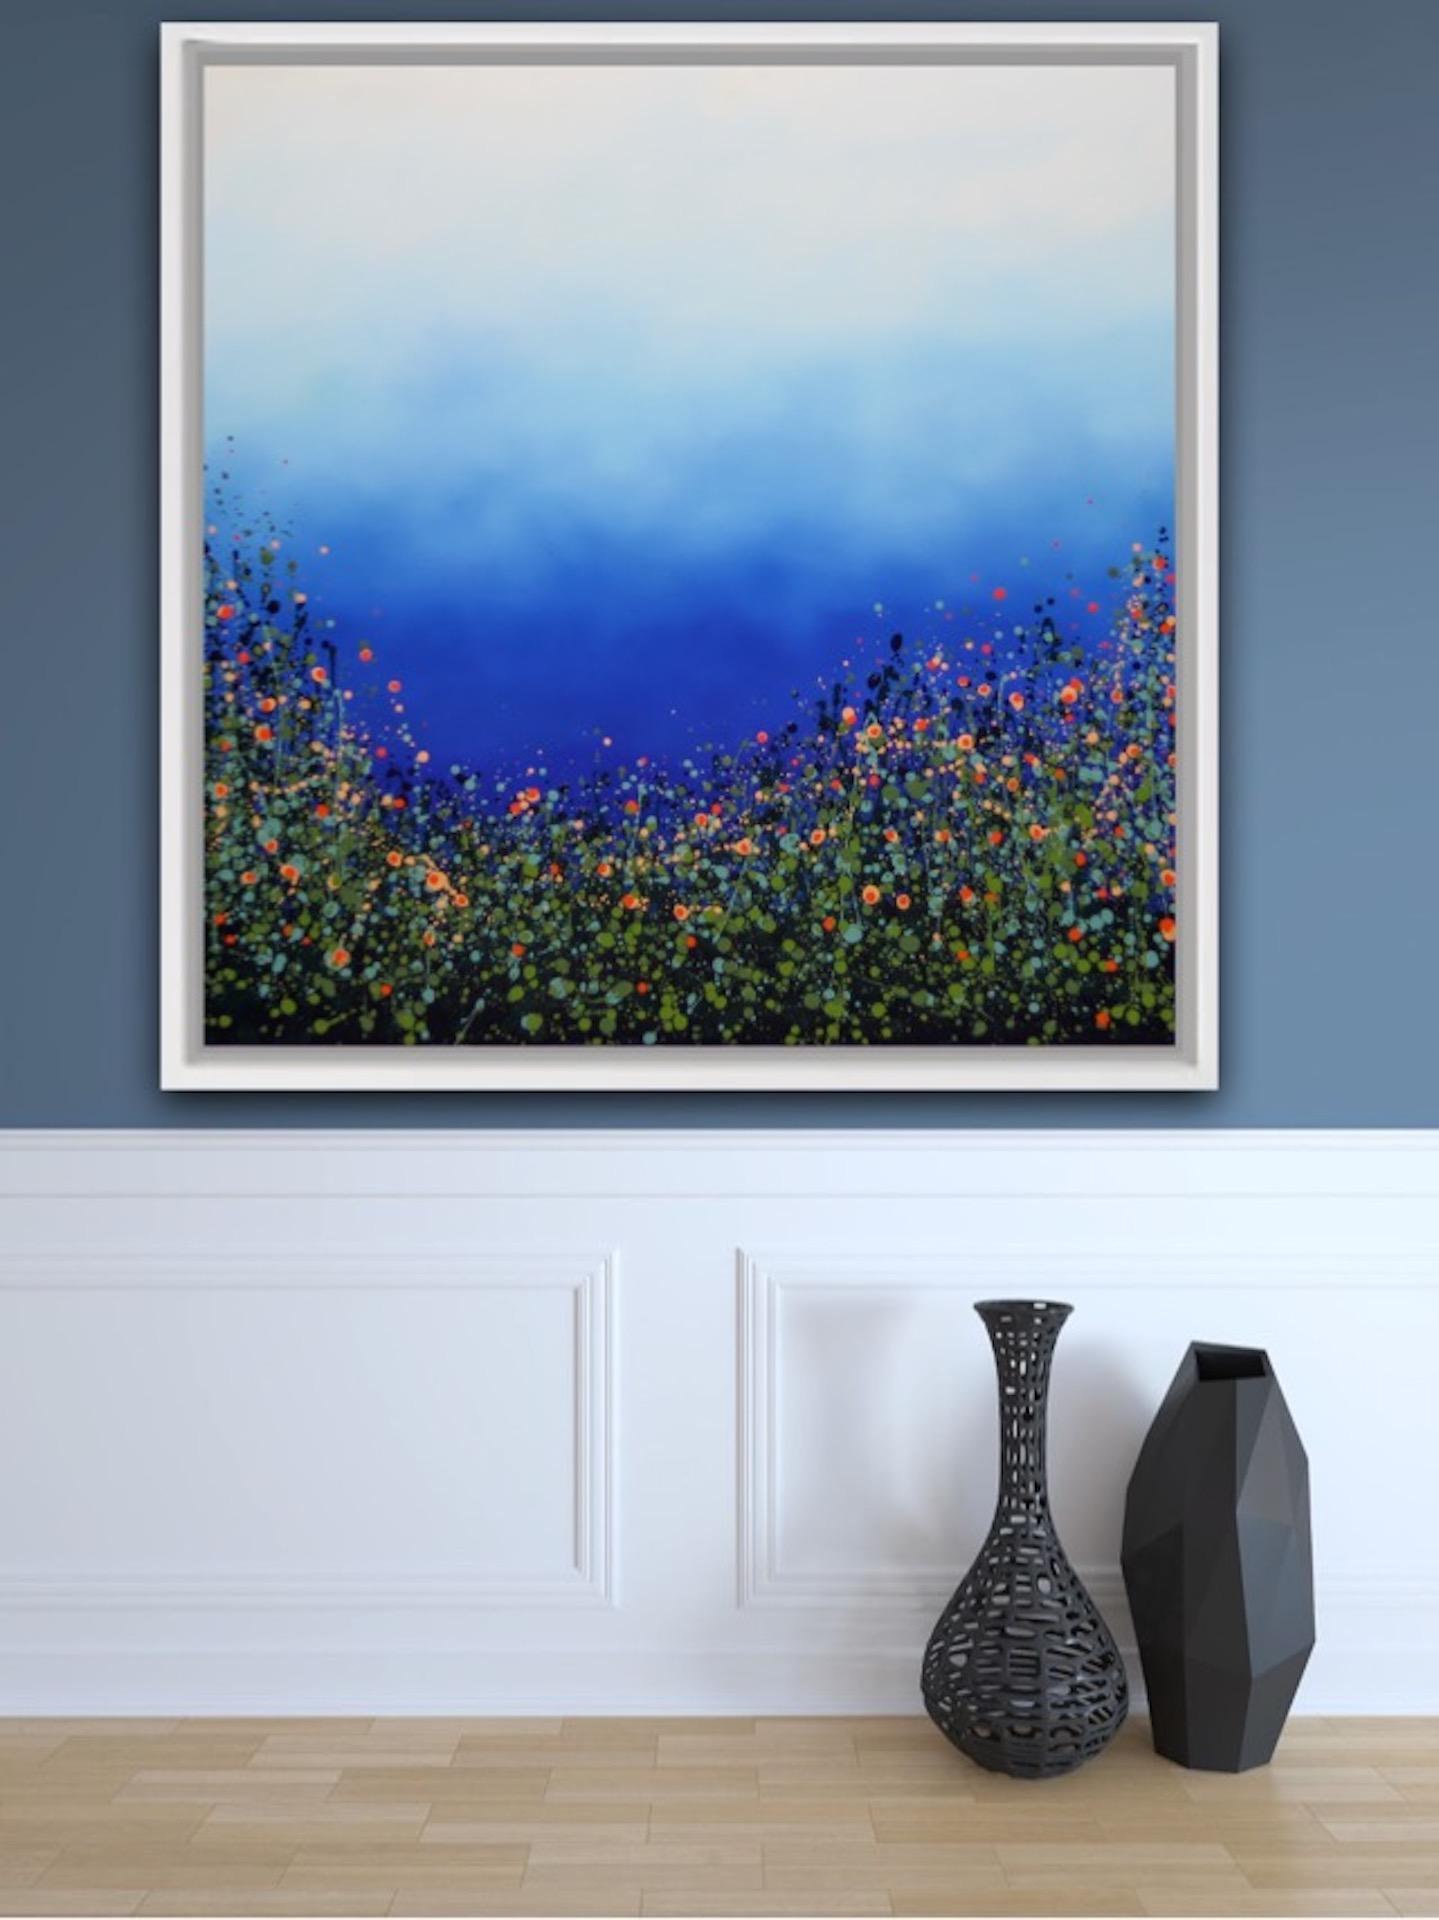 Sophie Berger
Glorious Wild Flowers
Original Abstract Painting
Oil Paint on Canvas
Image Size: 100 cm x 100 cm x 2.5 cm
Sold Framed
Framed Size : 120 cm x 120 cm x 2.5

Glorious Wild Flowers is an original painting by Sophie Berger. The bold blues